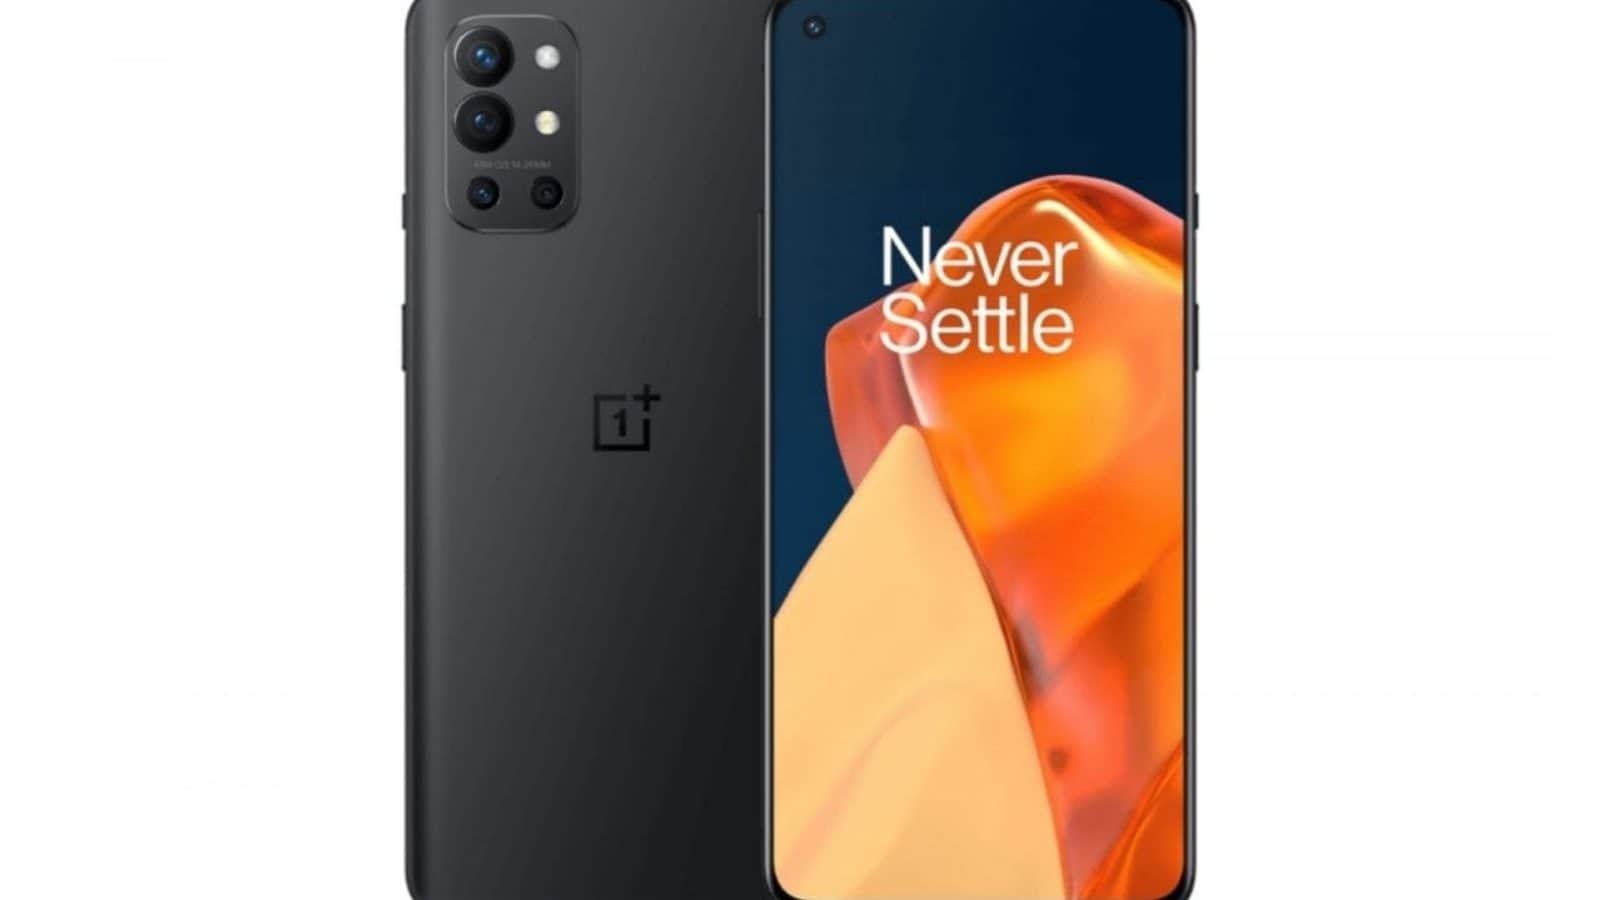 OnePlus 9 RT With Snapdragon 870 SoC Tipped to Launch on October 15